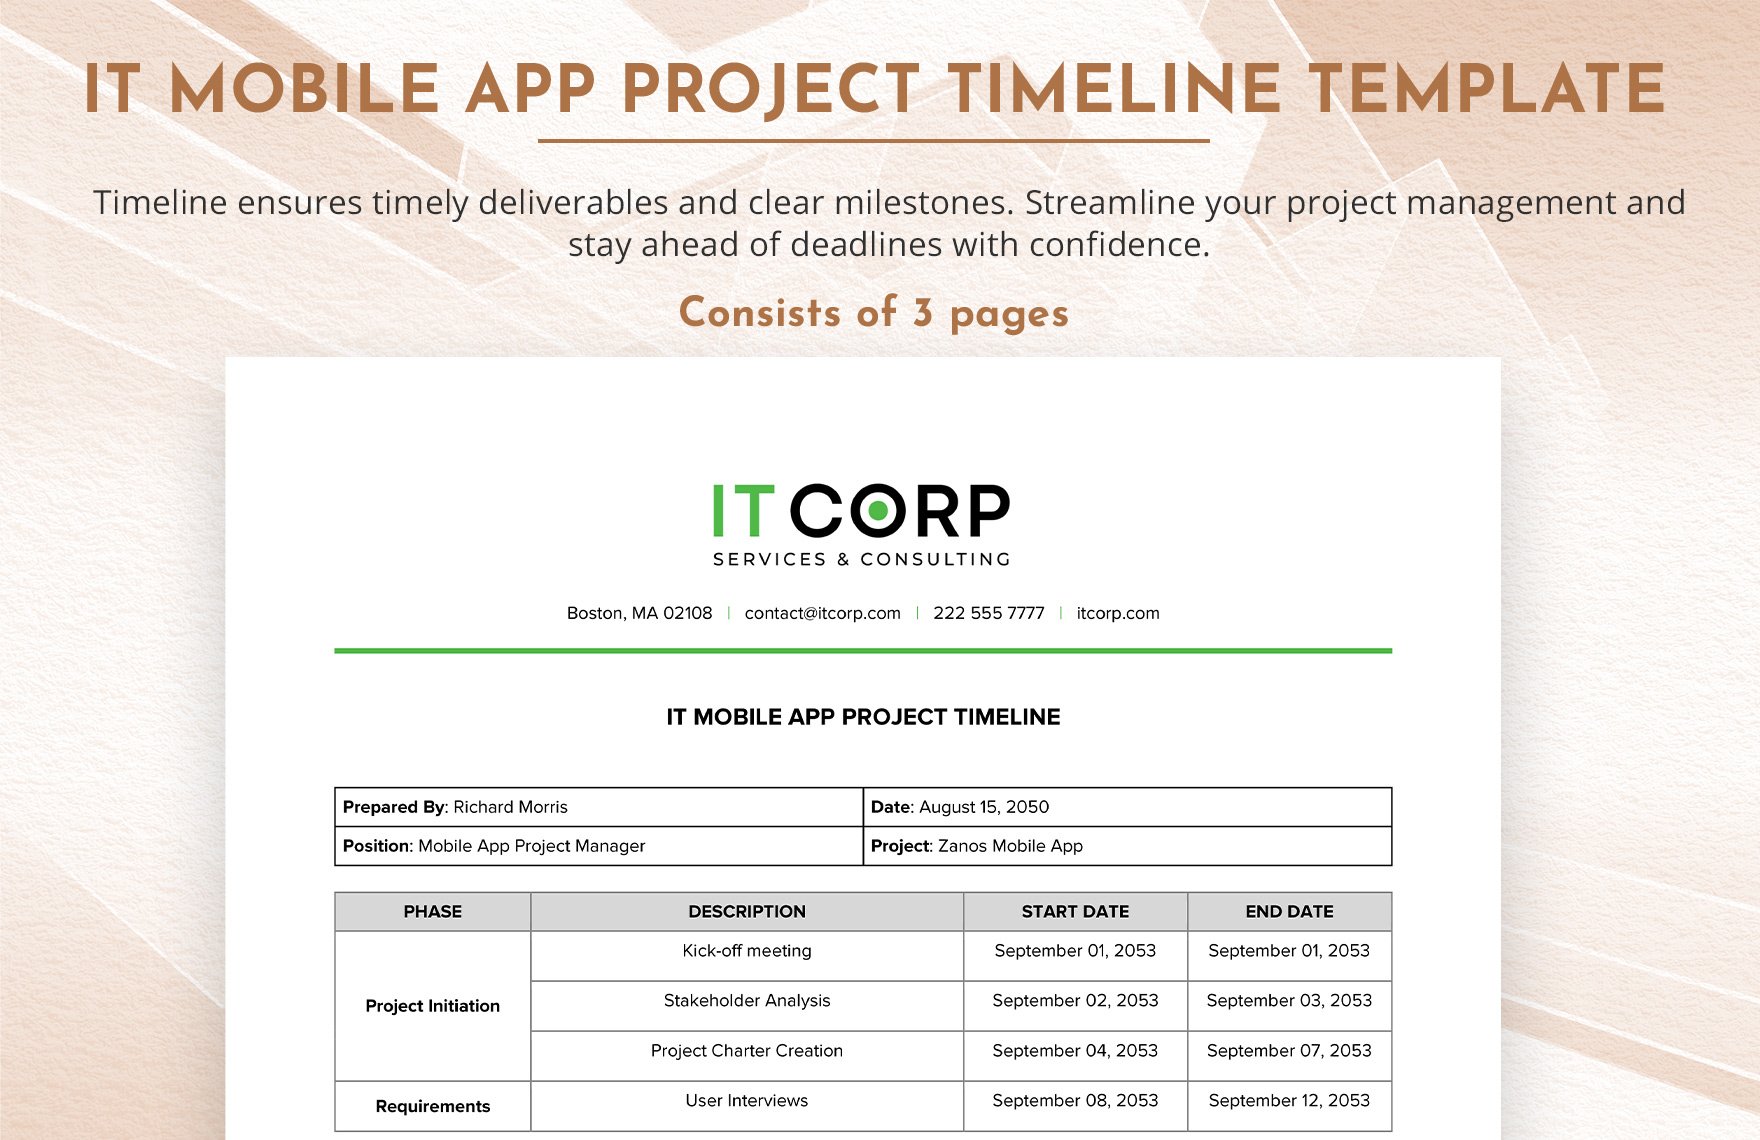 IT Mobile App Project Timeline Template